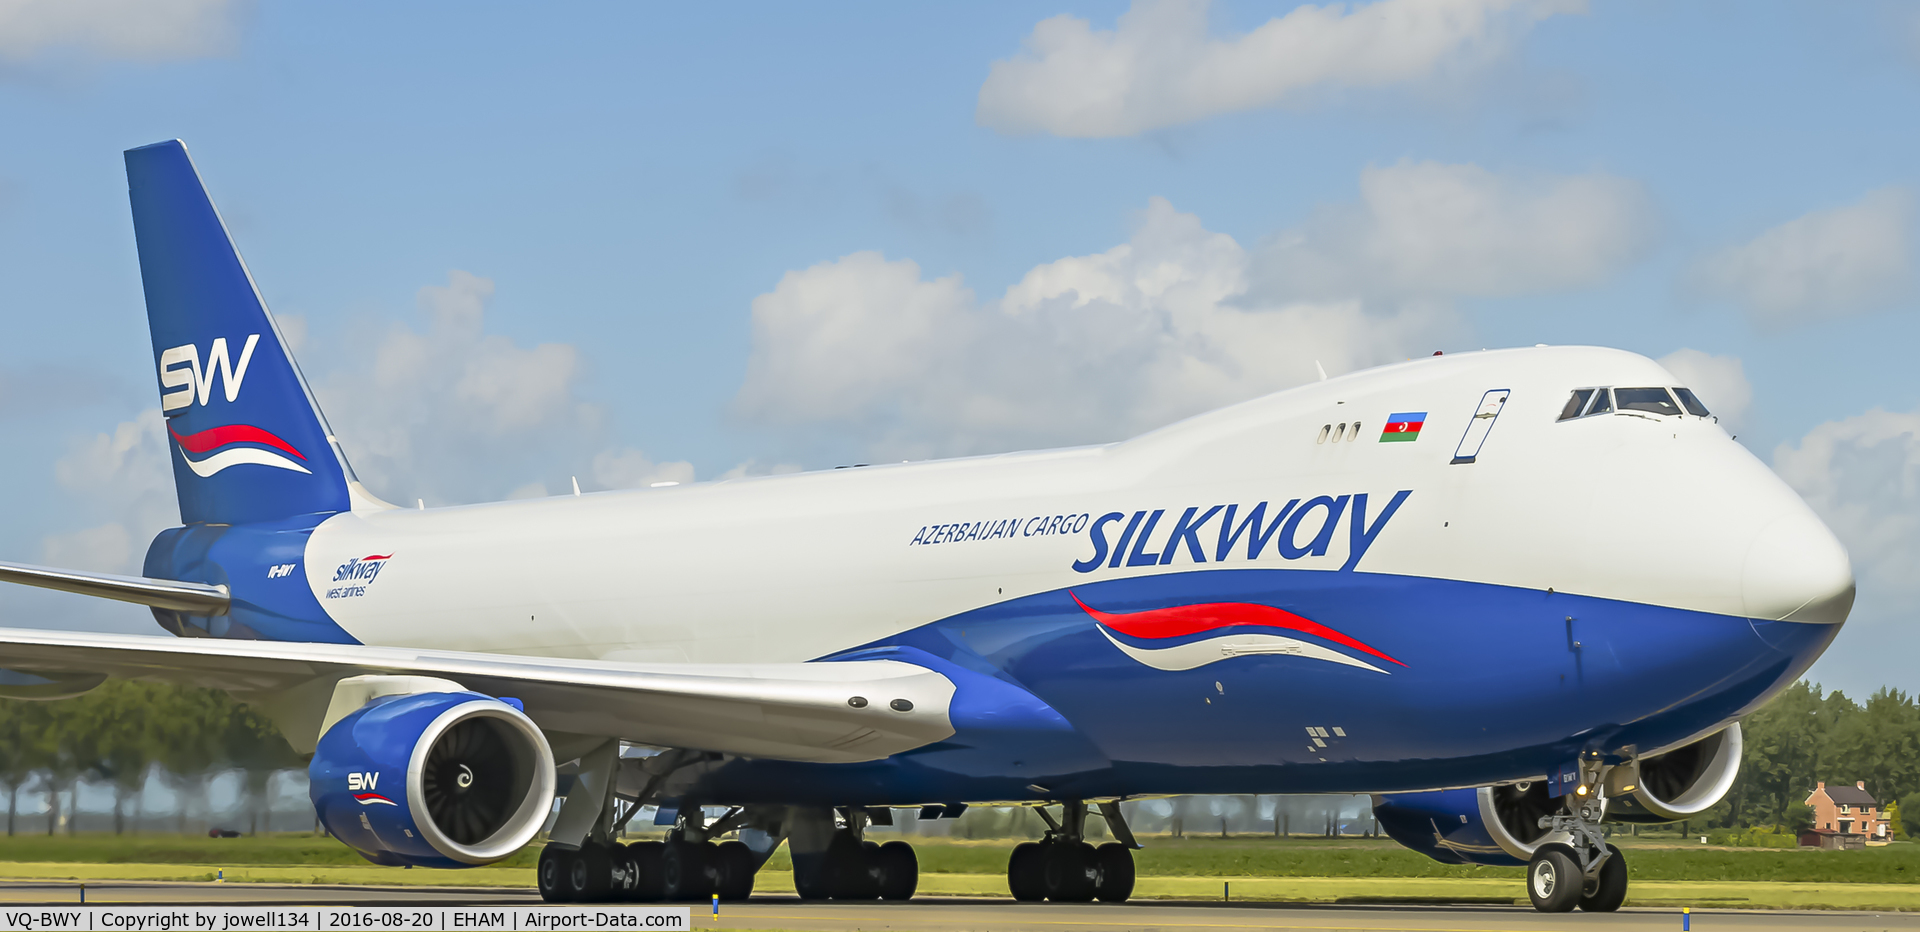 VQ-BWY, 2015 Boeing 747-83QF C/N 60120, VQ-BWY Silkway west airlines